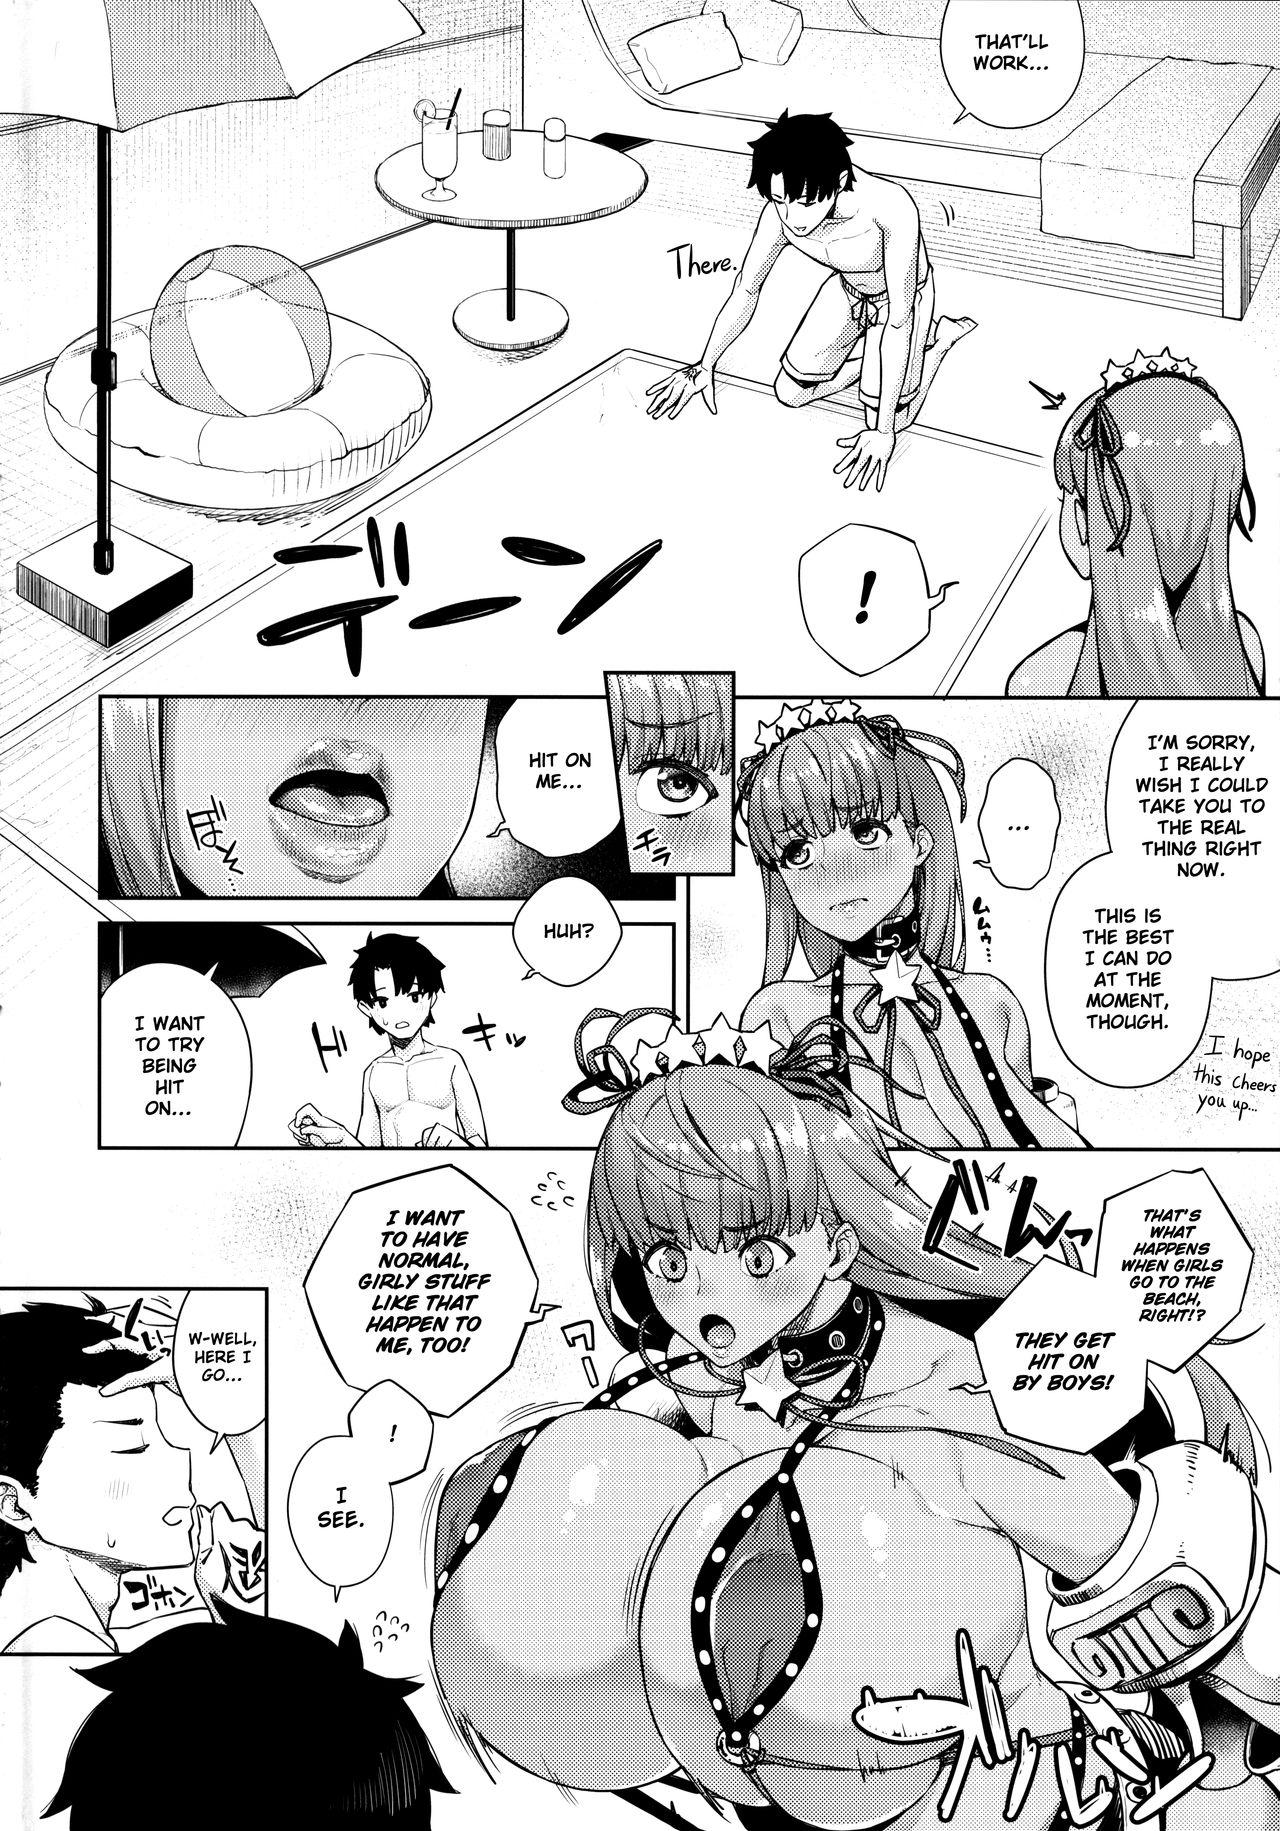 Black Hair Kyokou no Umibe nite | at the fictional seaside - Fate grand order Action - Page 4